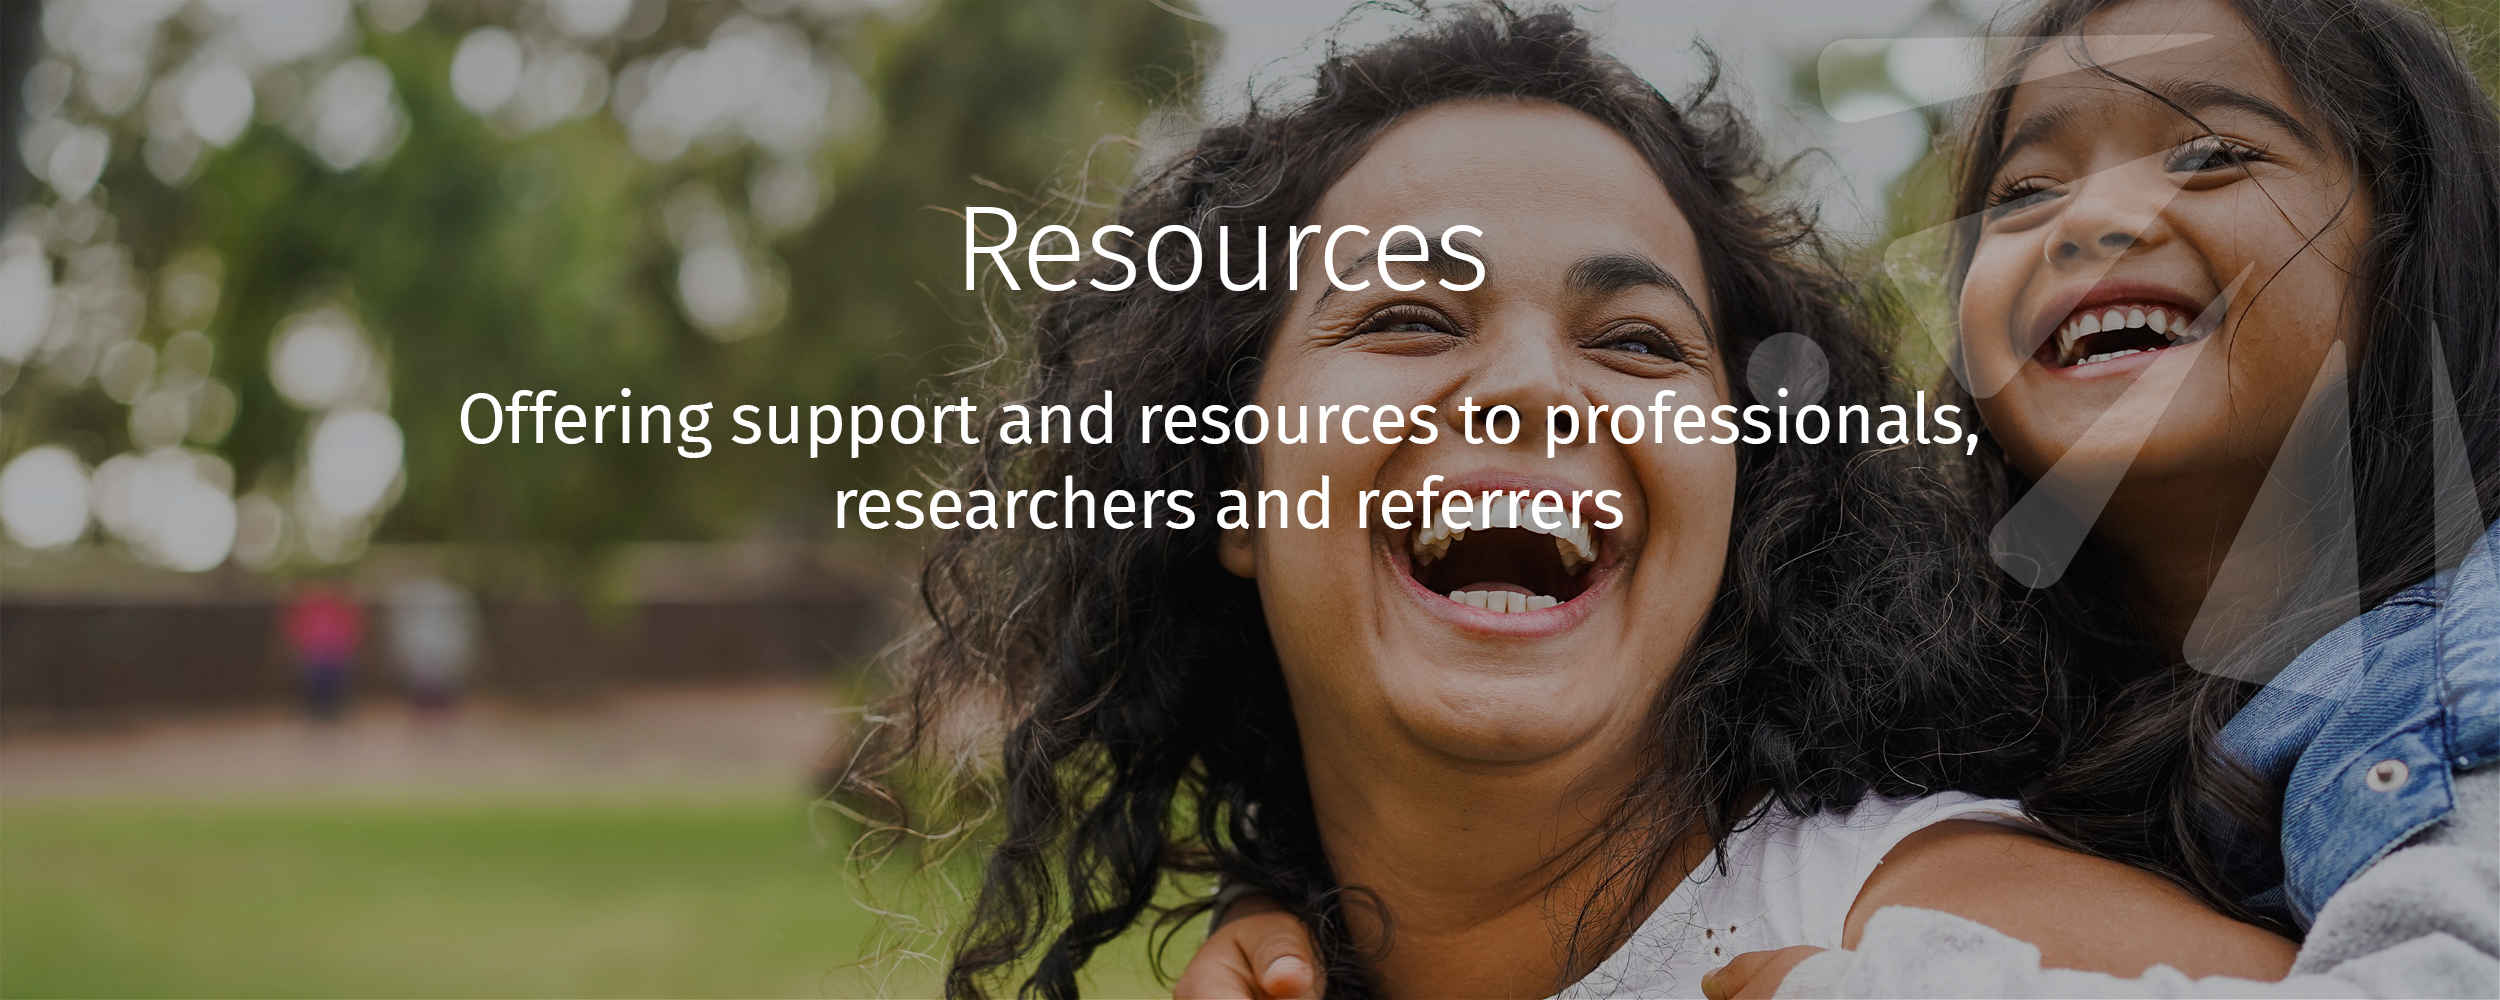 Offering support and resources to professionals, researchers and referrers